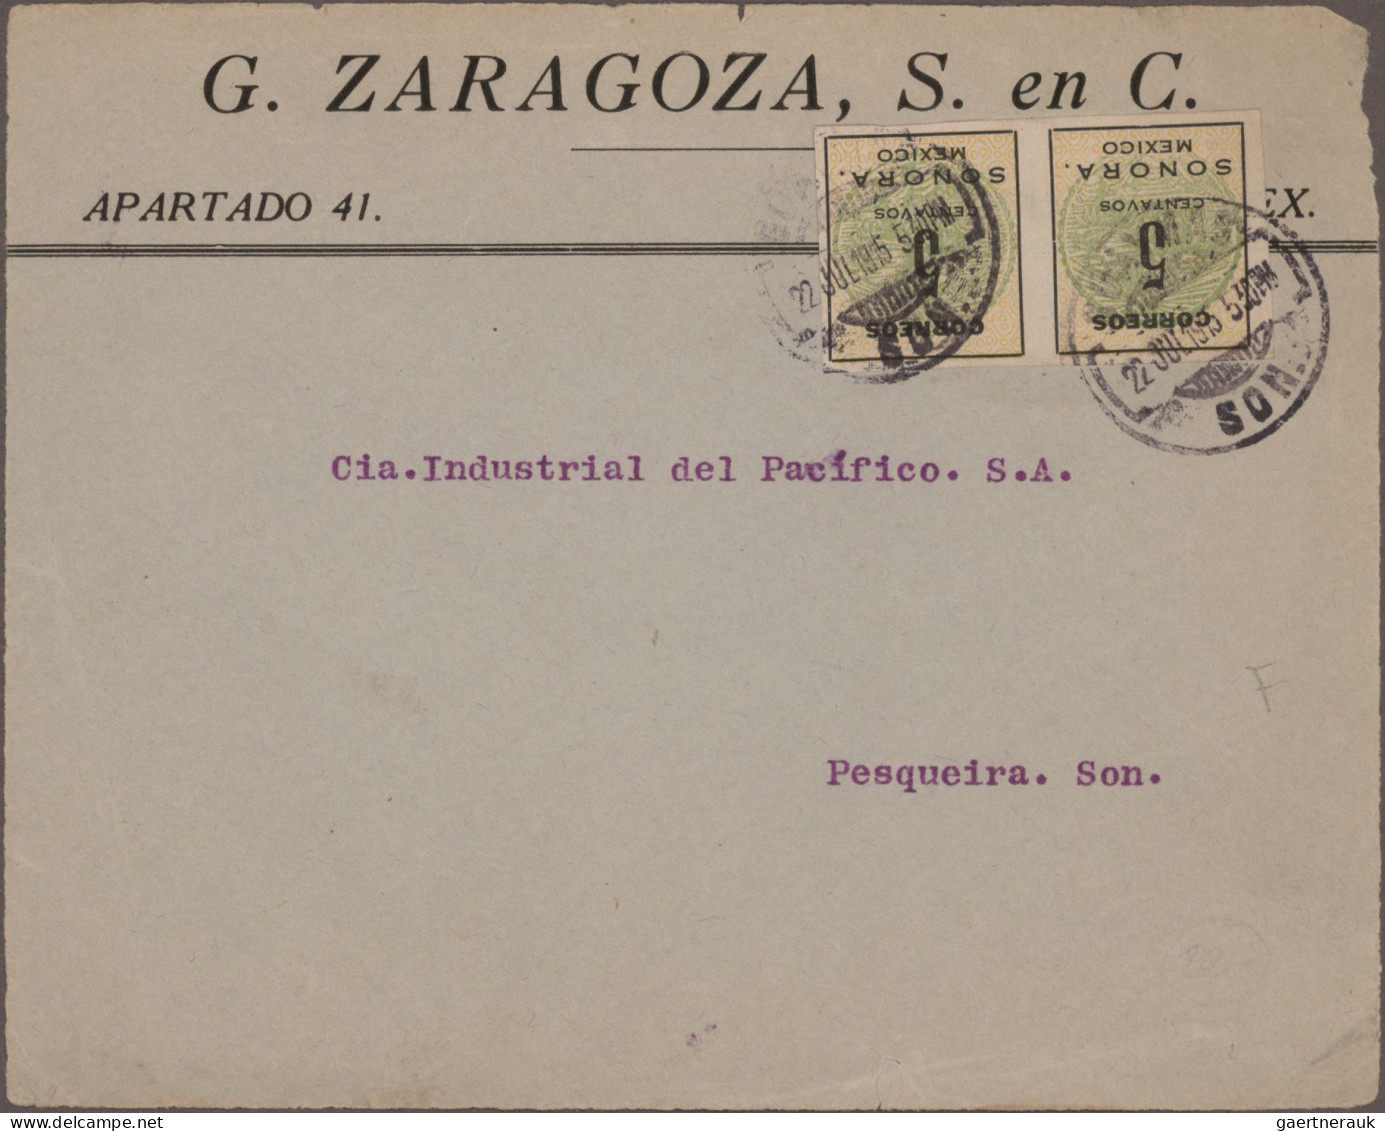 Central and South America: 1881/1963, mainly used stationery and airmail covers